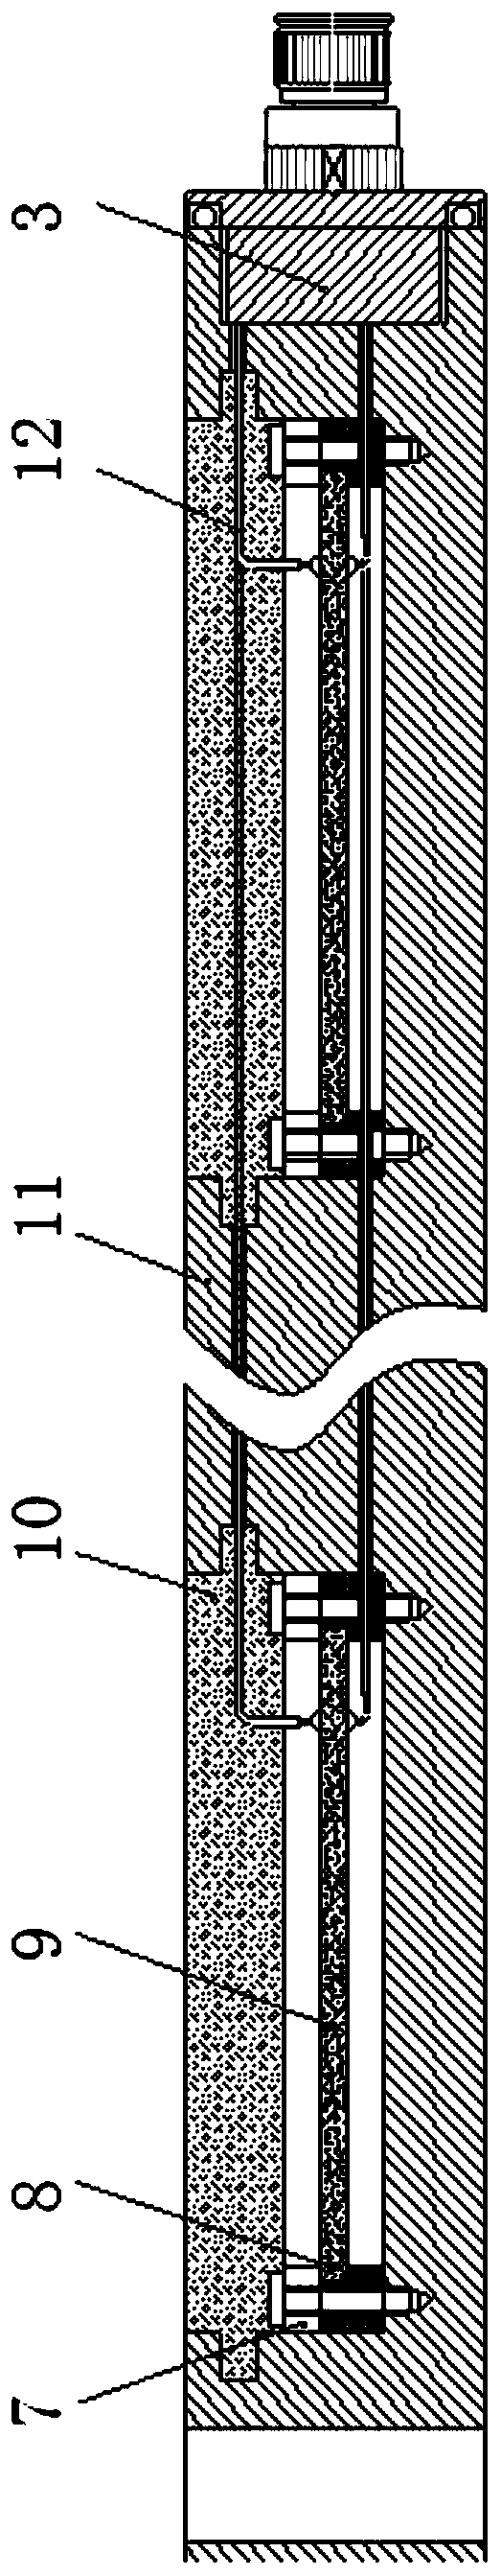 A Modular Embedded Cylindrical Conformal Acoustic Array for Mine